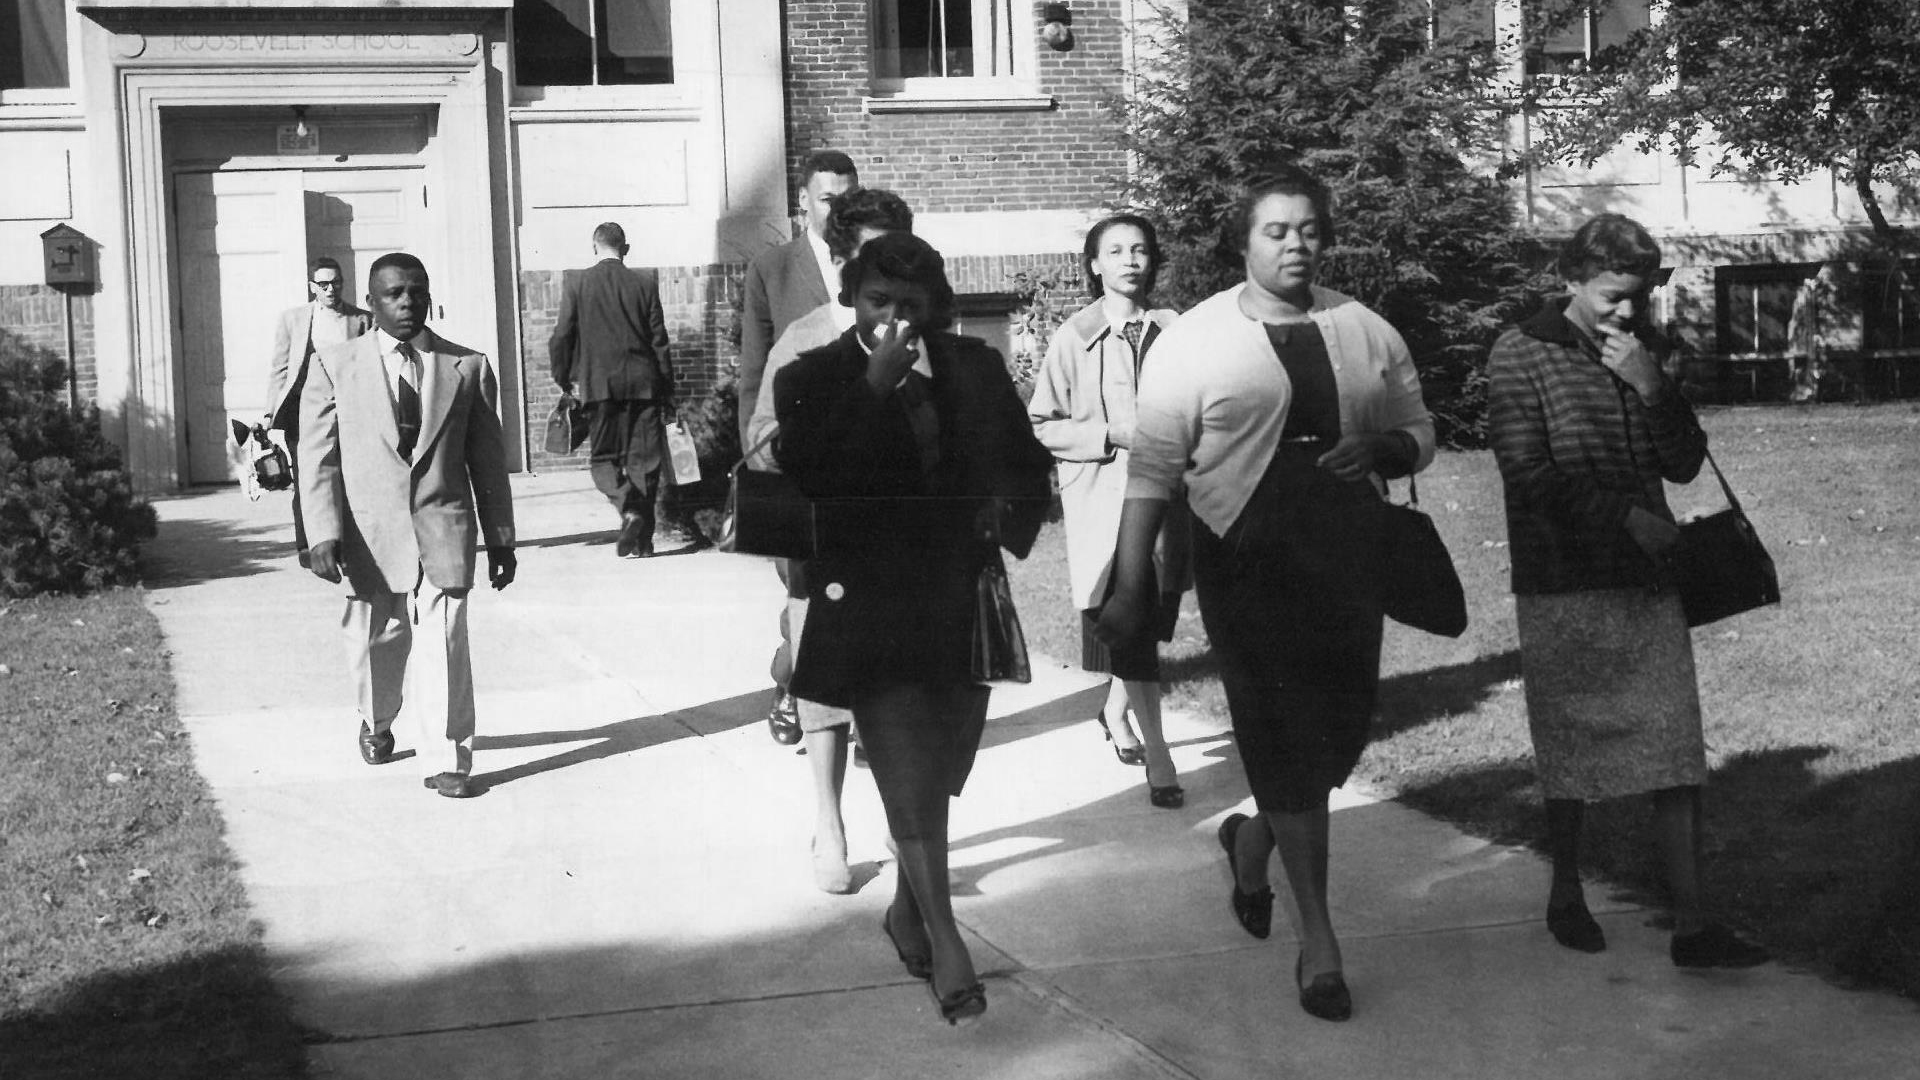 LevelingLincolnPhoto: Lincoln School Parents leaving the mostly white Roosevelt Elementary School after being denied registration for their children, New Rochelle, 1960. Courtesy of Arden Teresa Lewis.